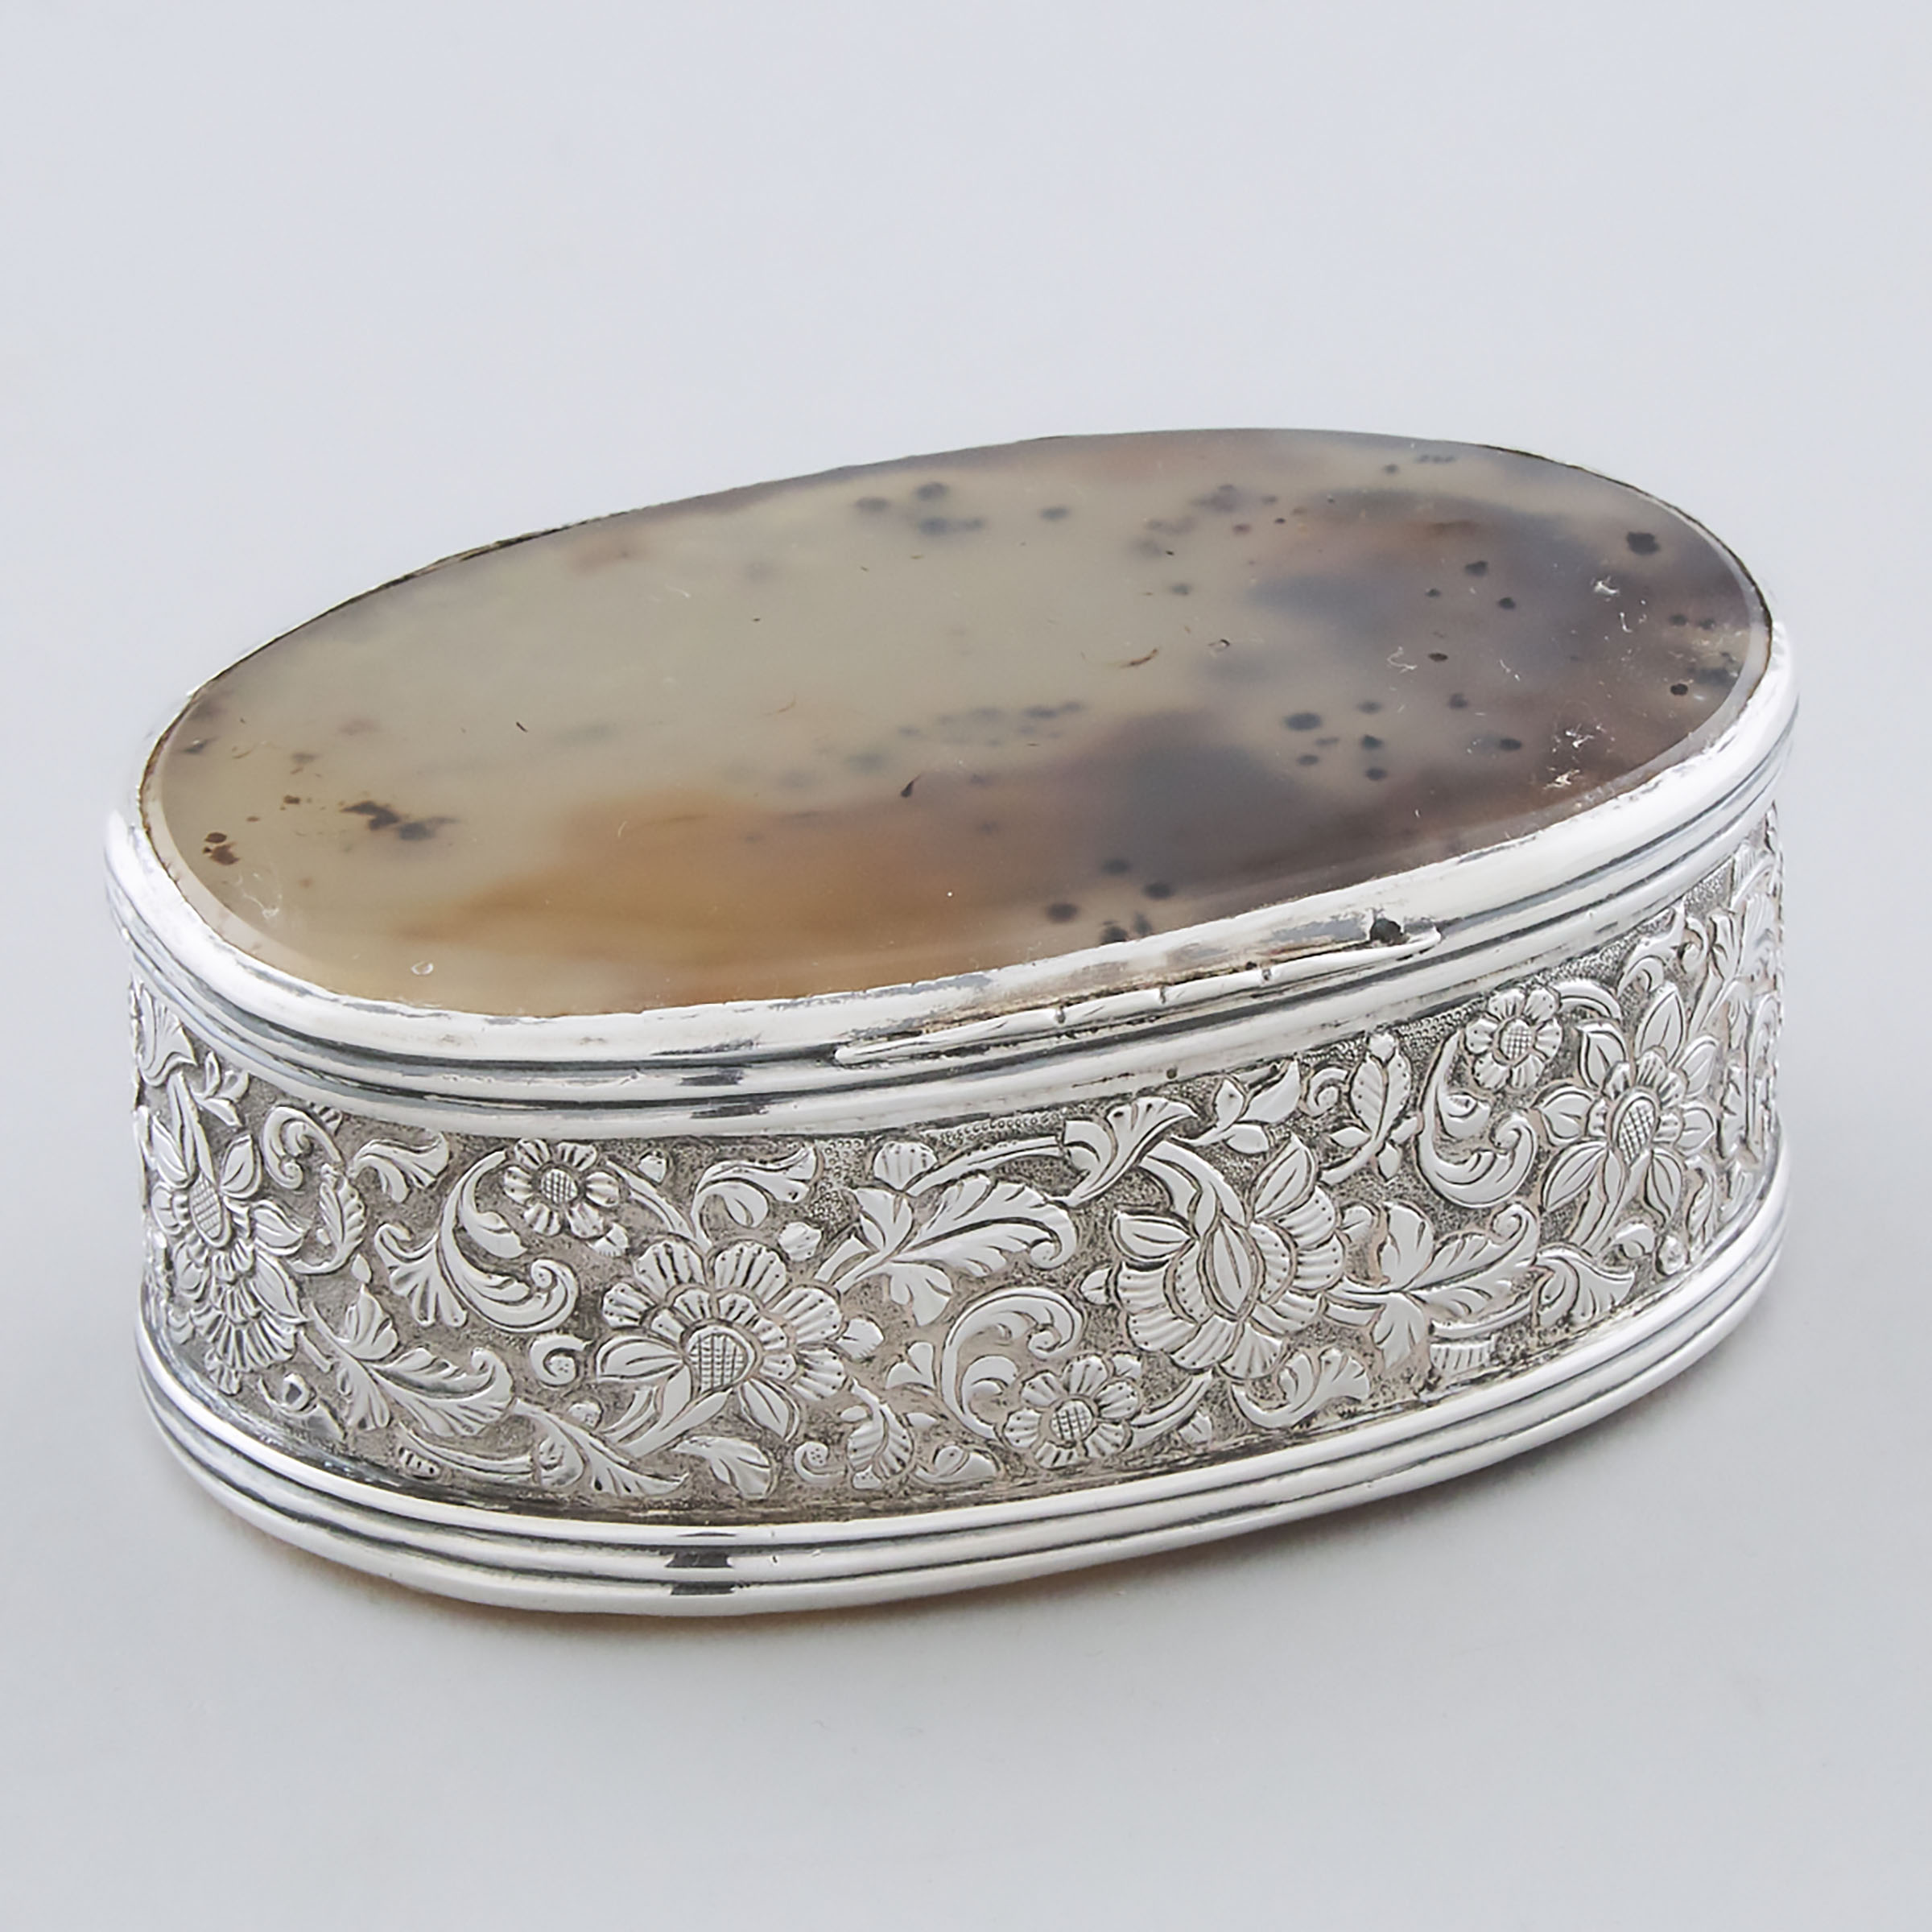 Eastern Silver and Agate Oval Box,